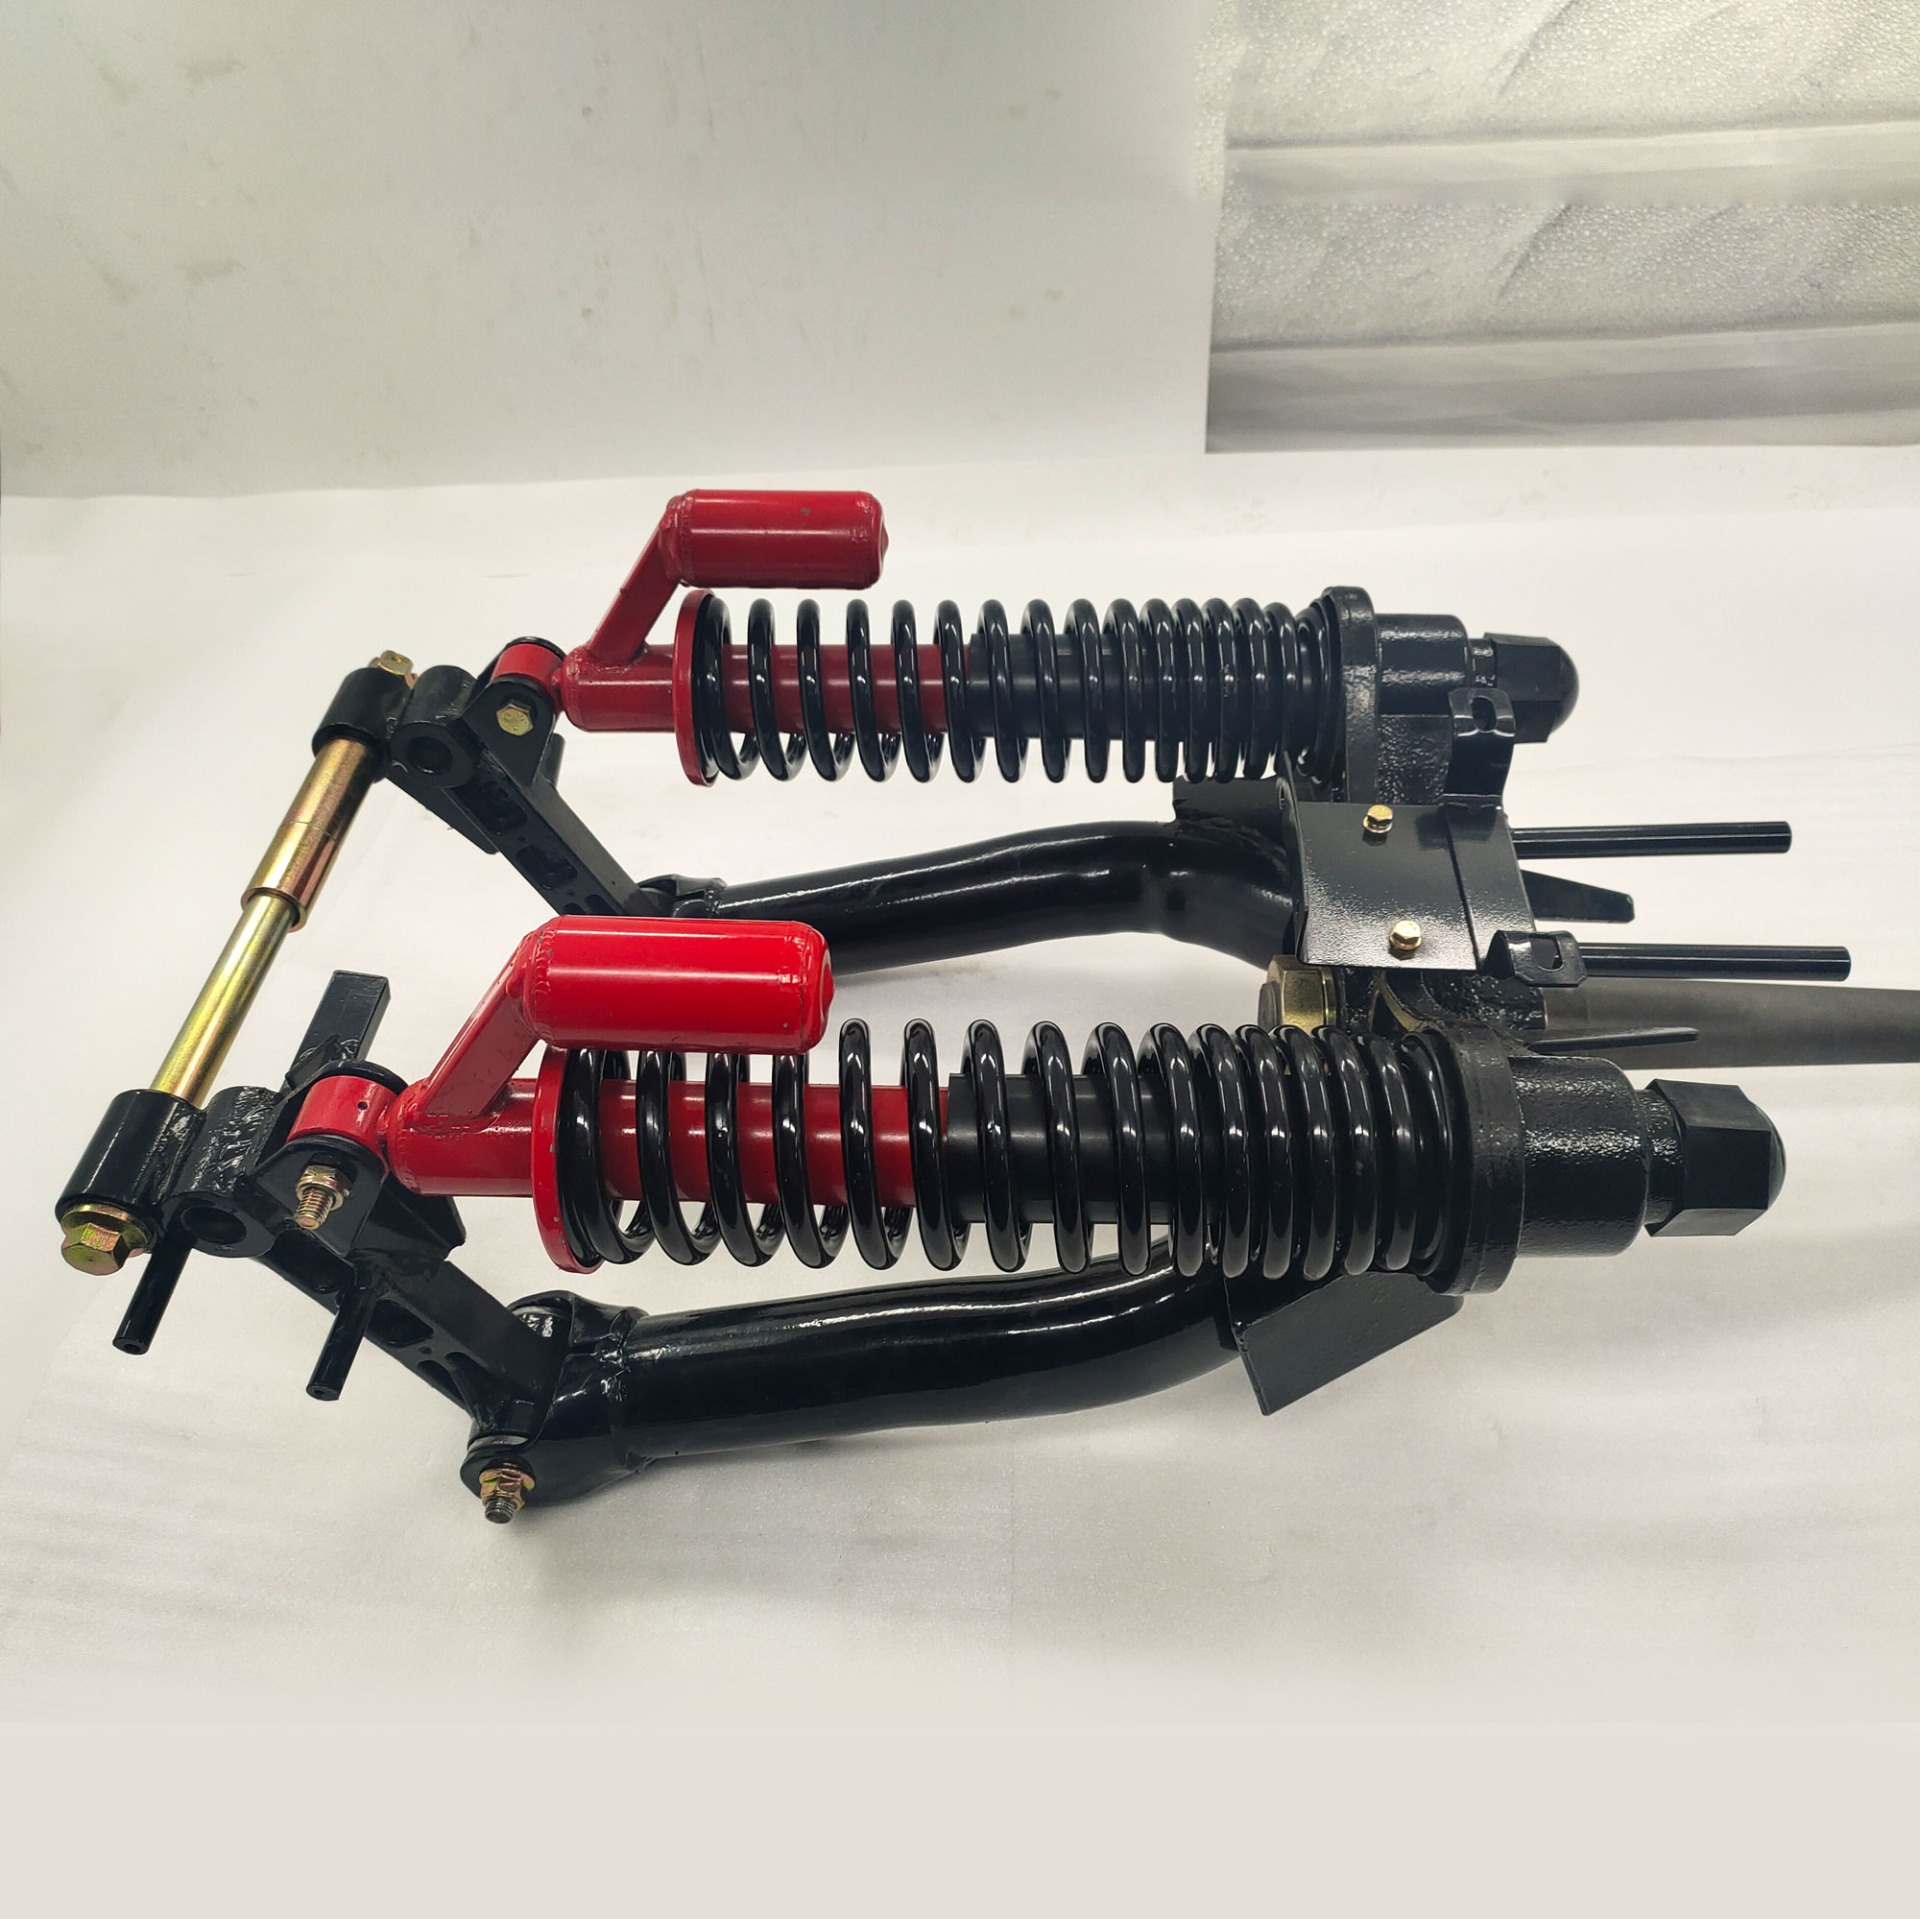 OEM suspension motorcycle rear shock absorber DAYANG Tricycle item packing pcs class motorcycles accept origin fit quality